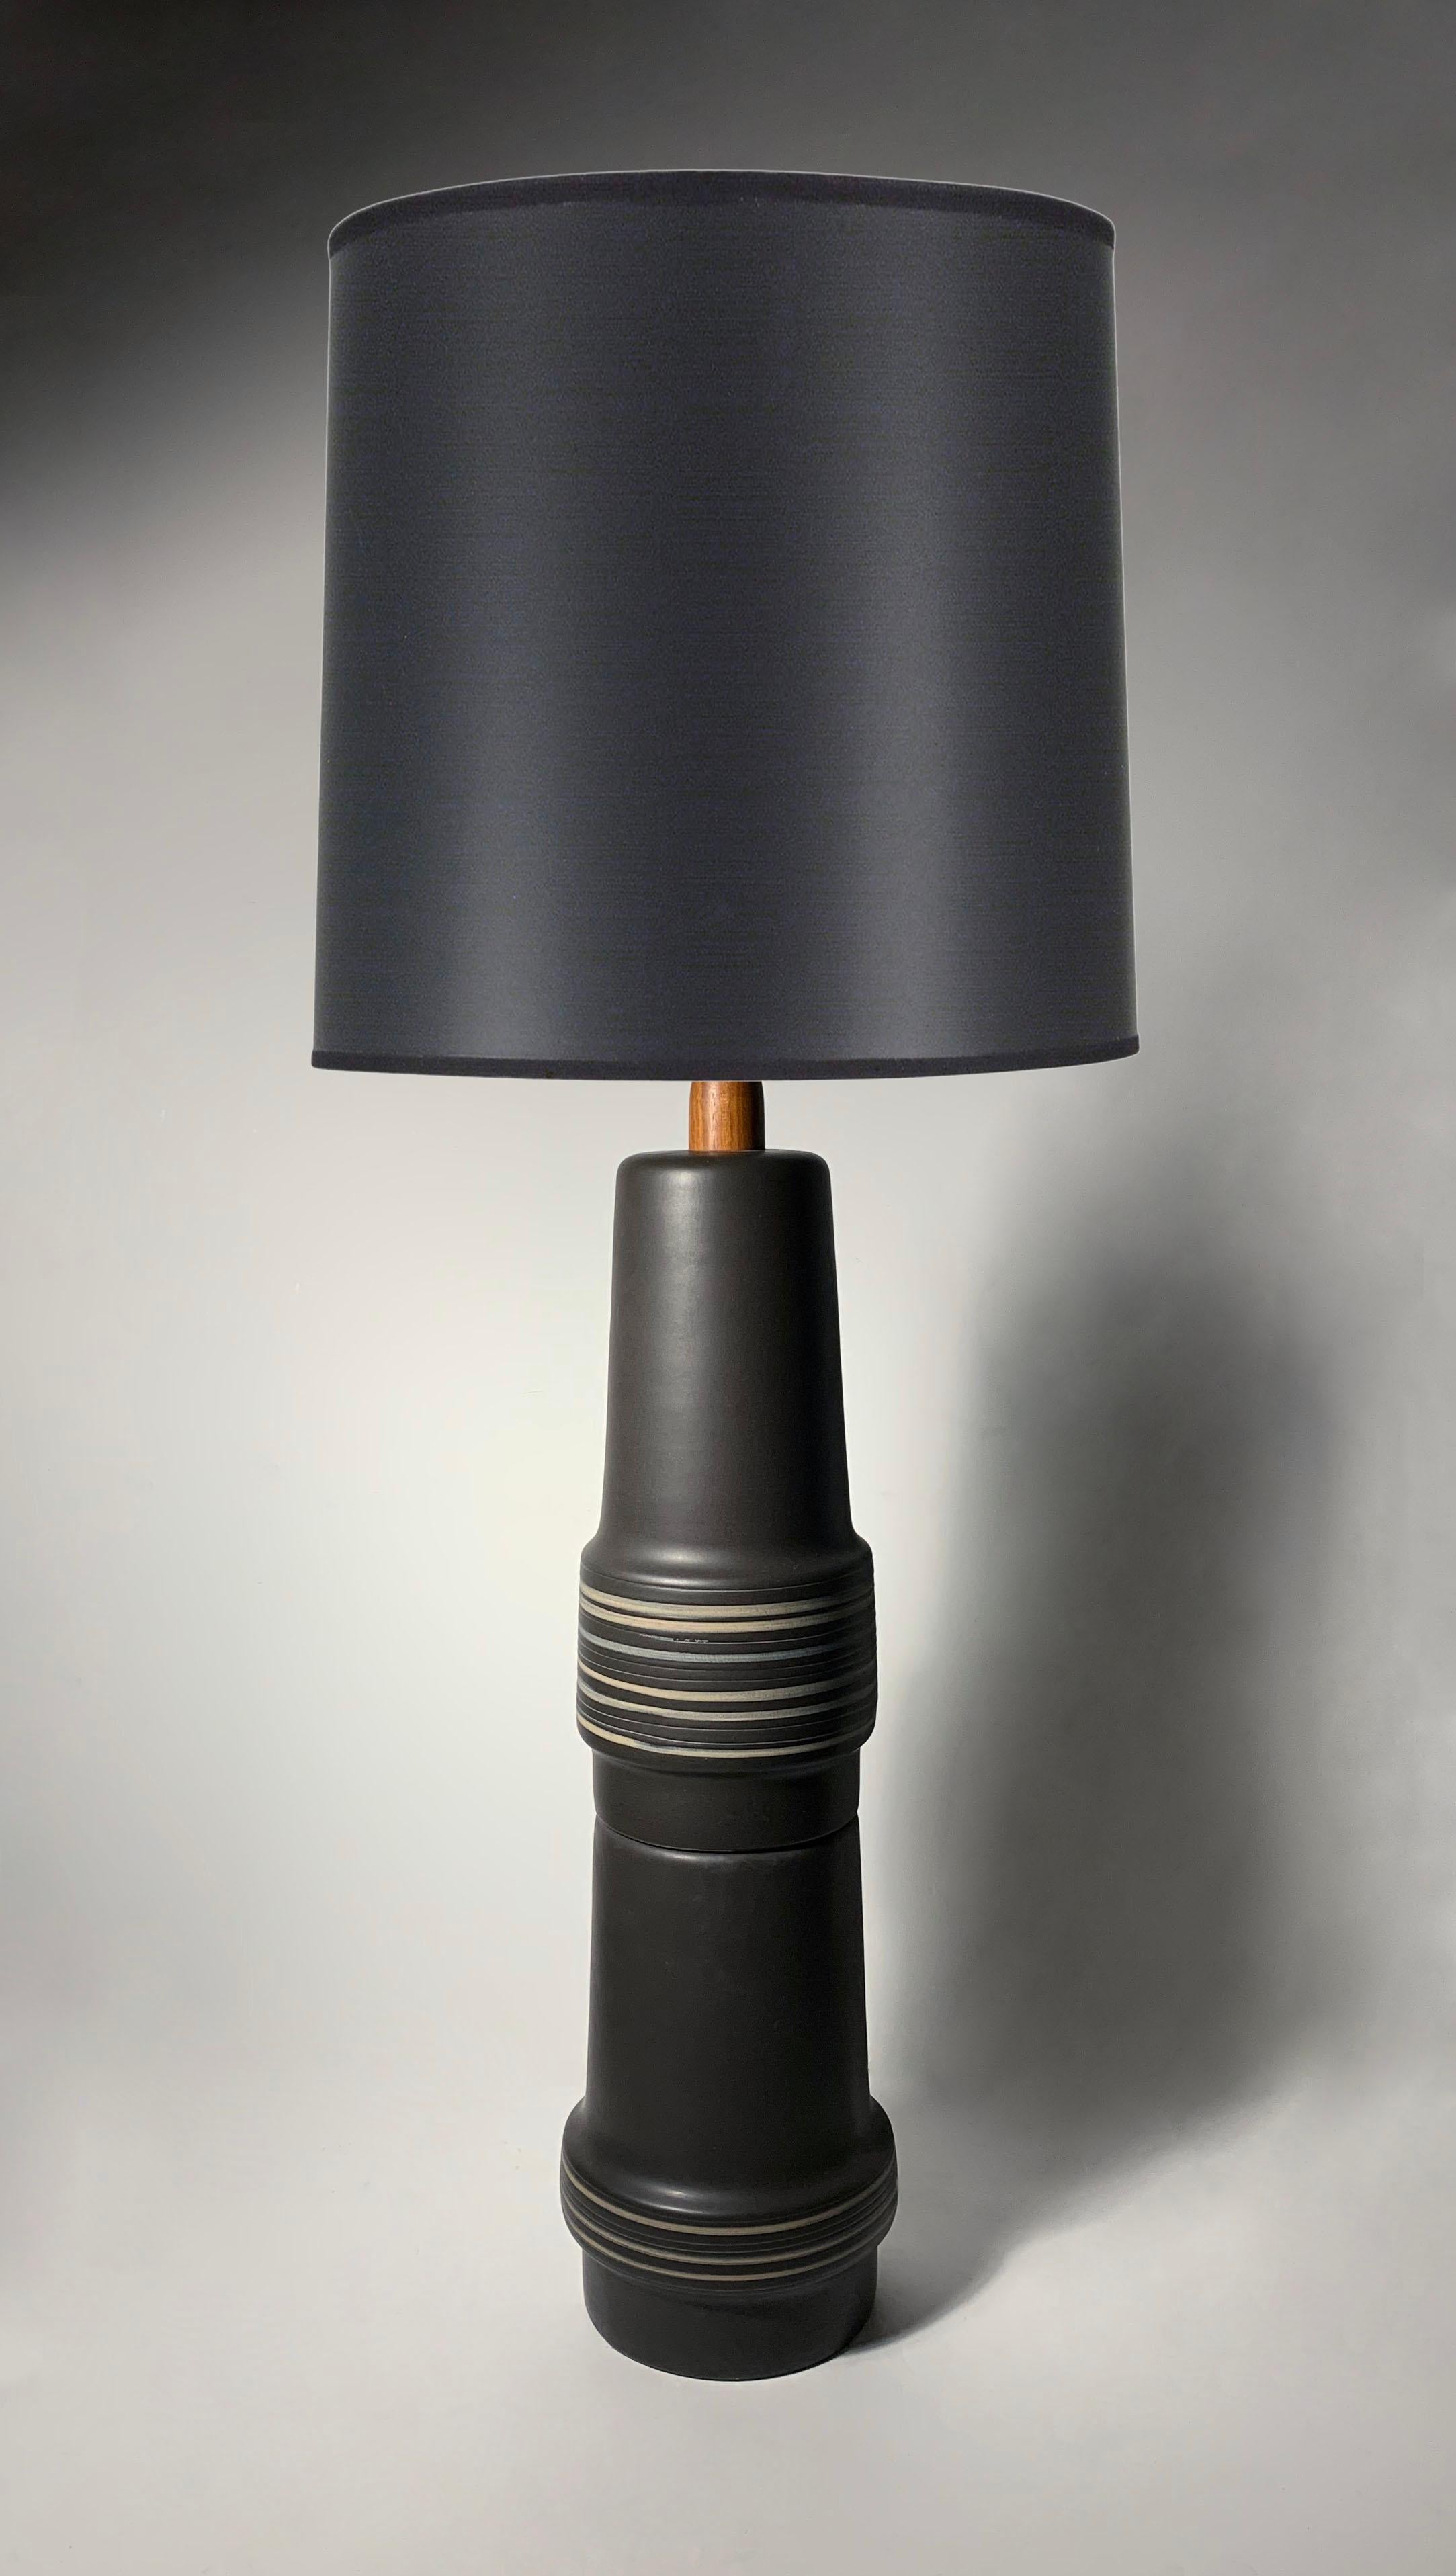 Gordon & Jane Martz Mid Century Stacked Ceramic Pottery Table Lamp in Black

Includes the original white shade shown in picture. Black shade is for Display purpose only. 